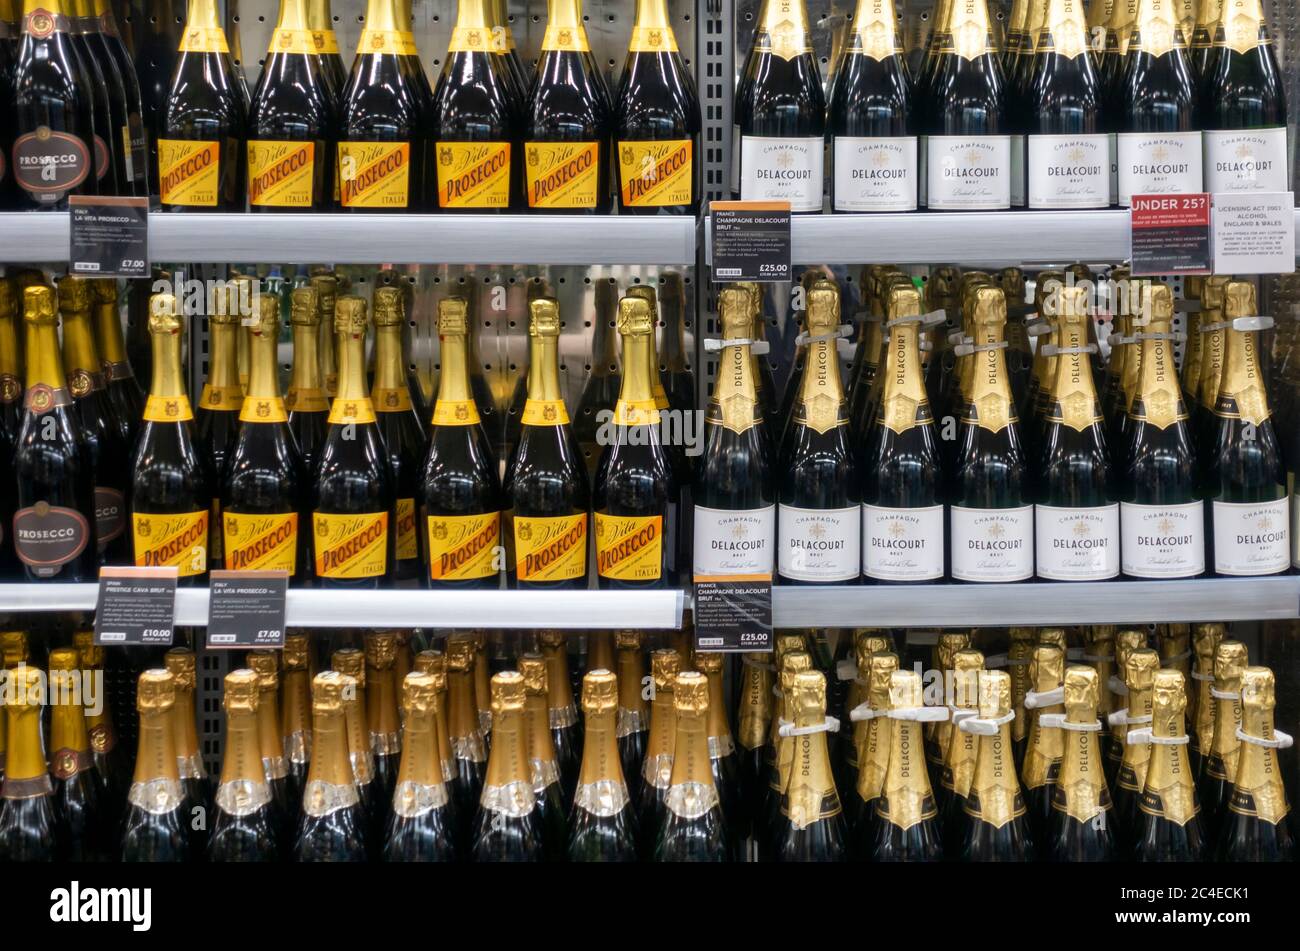 Sparkling wines at M&S Foodhall in UK Stock Photo